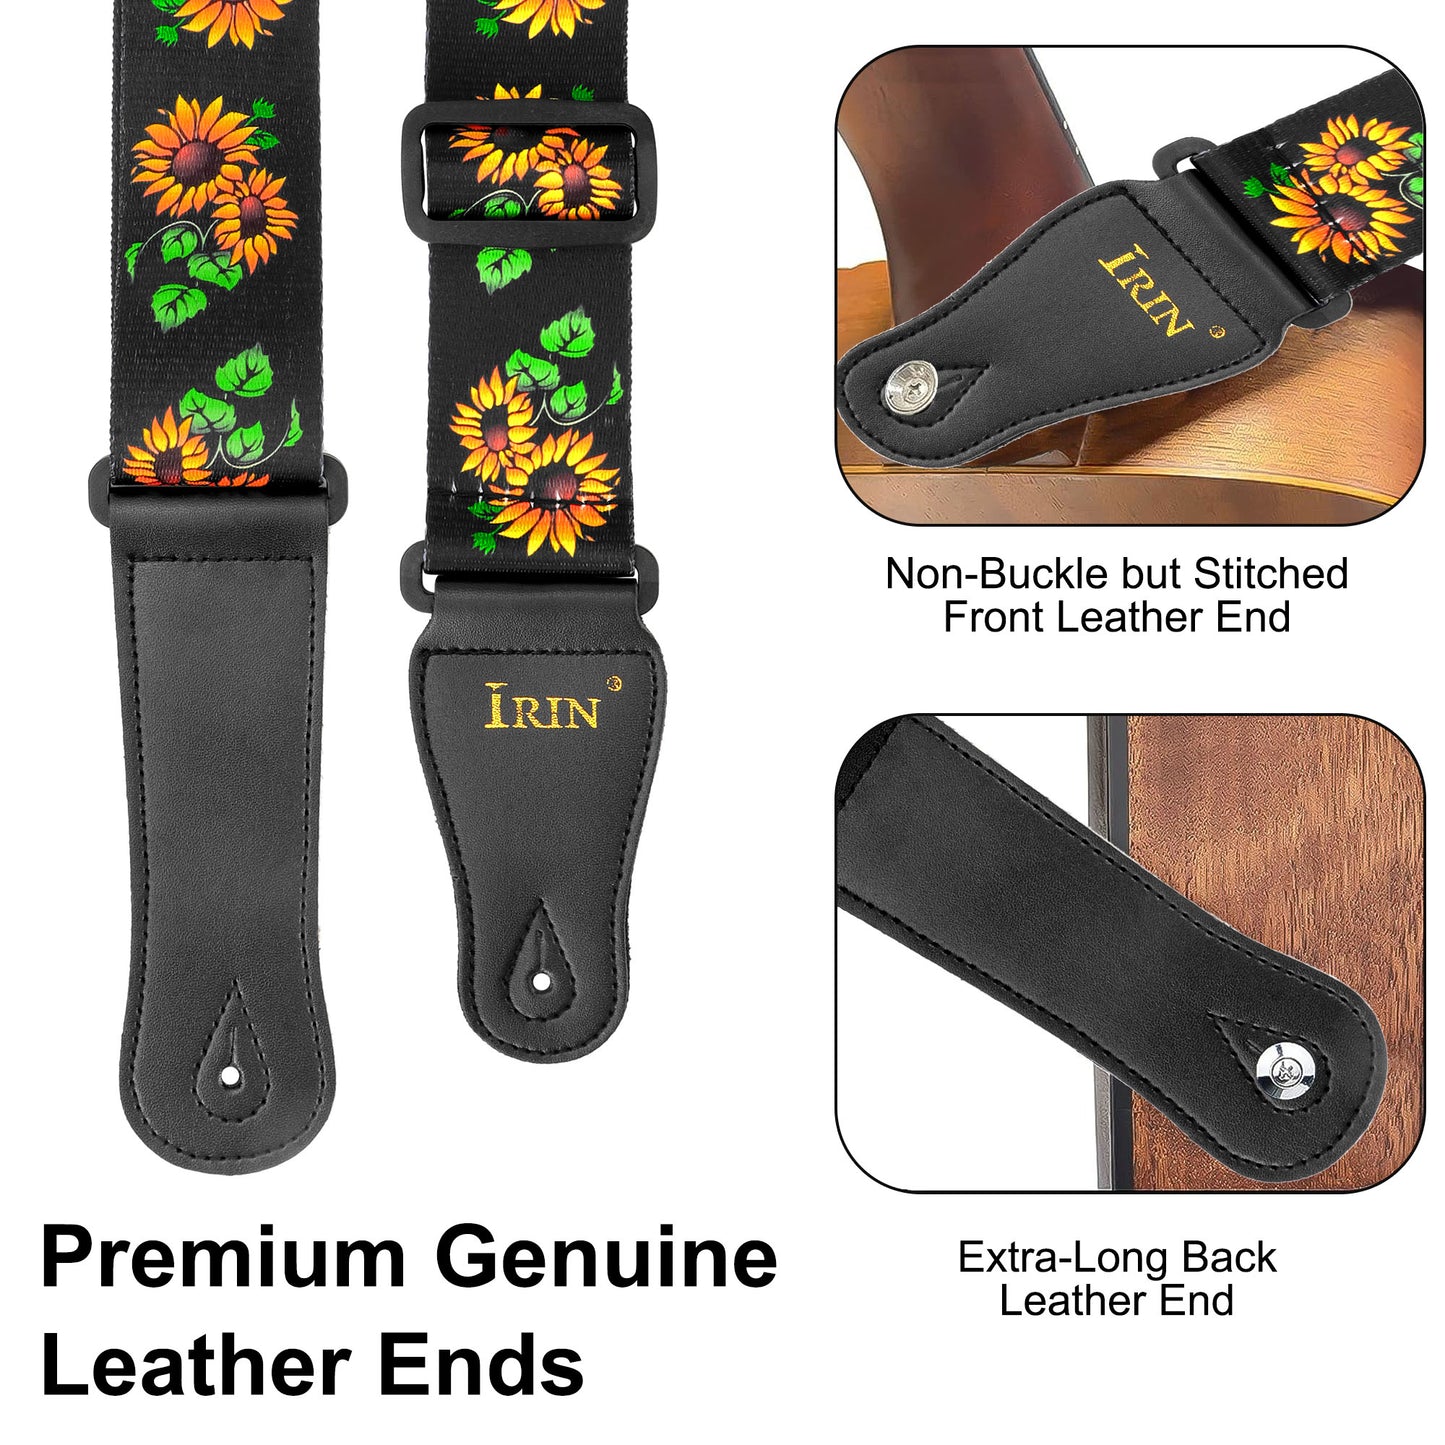 Sunflower Guitar Strap - Easy Installation, Perfect Musician Gift